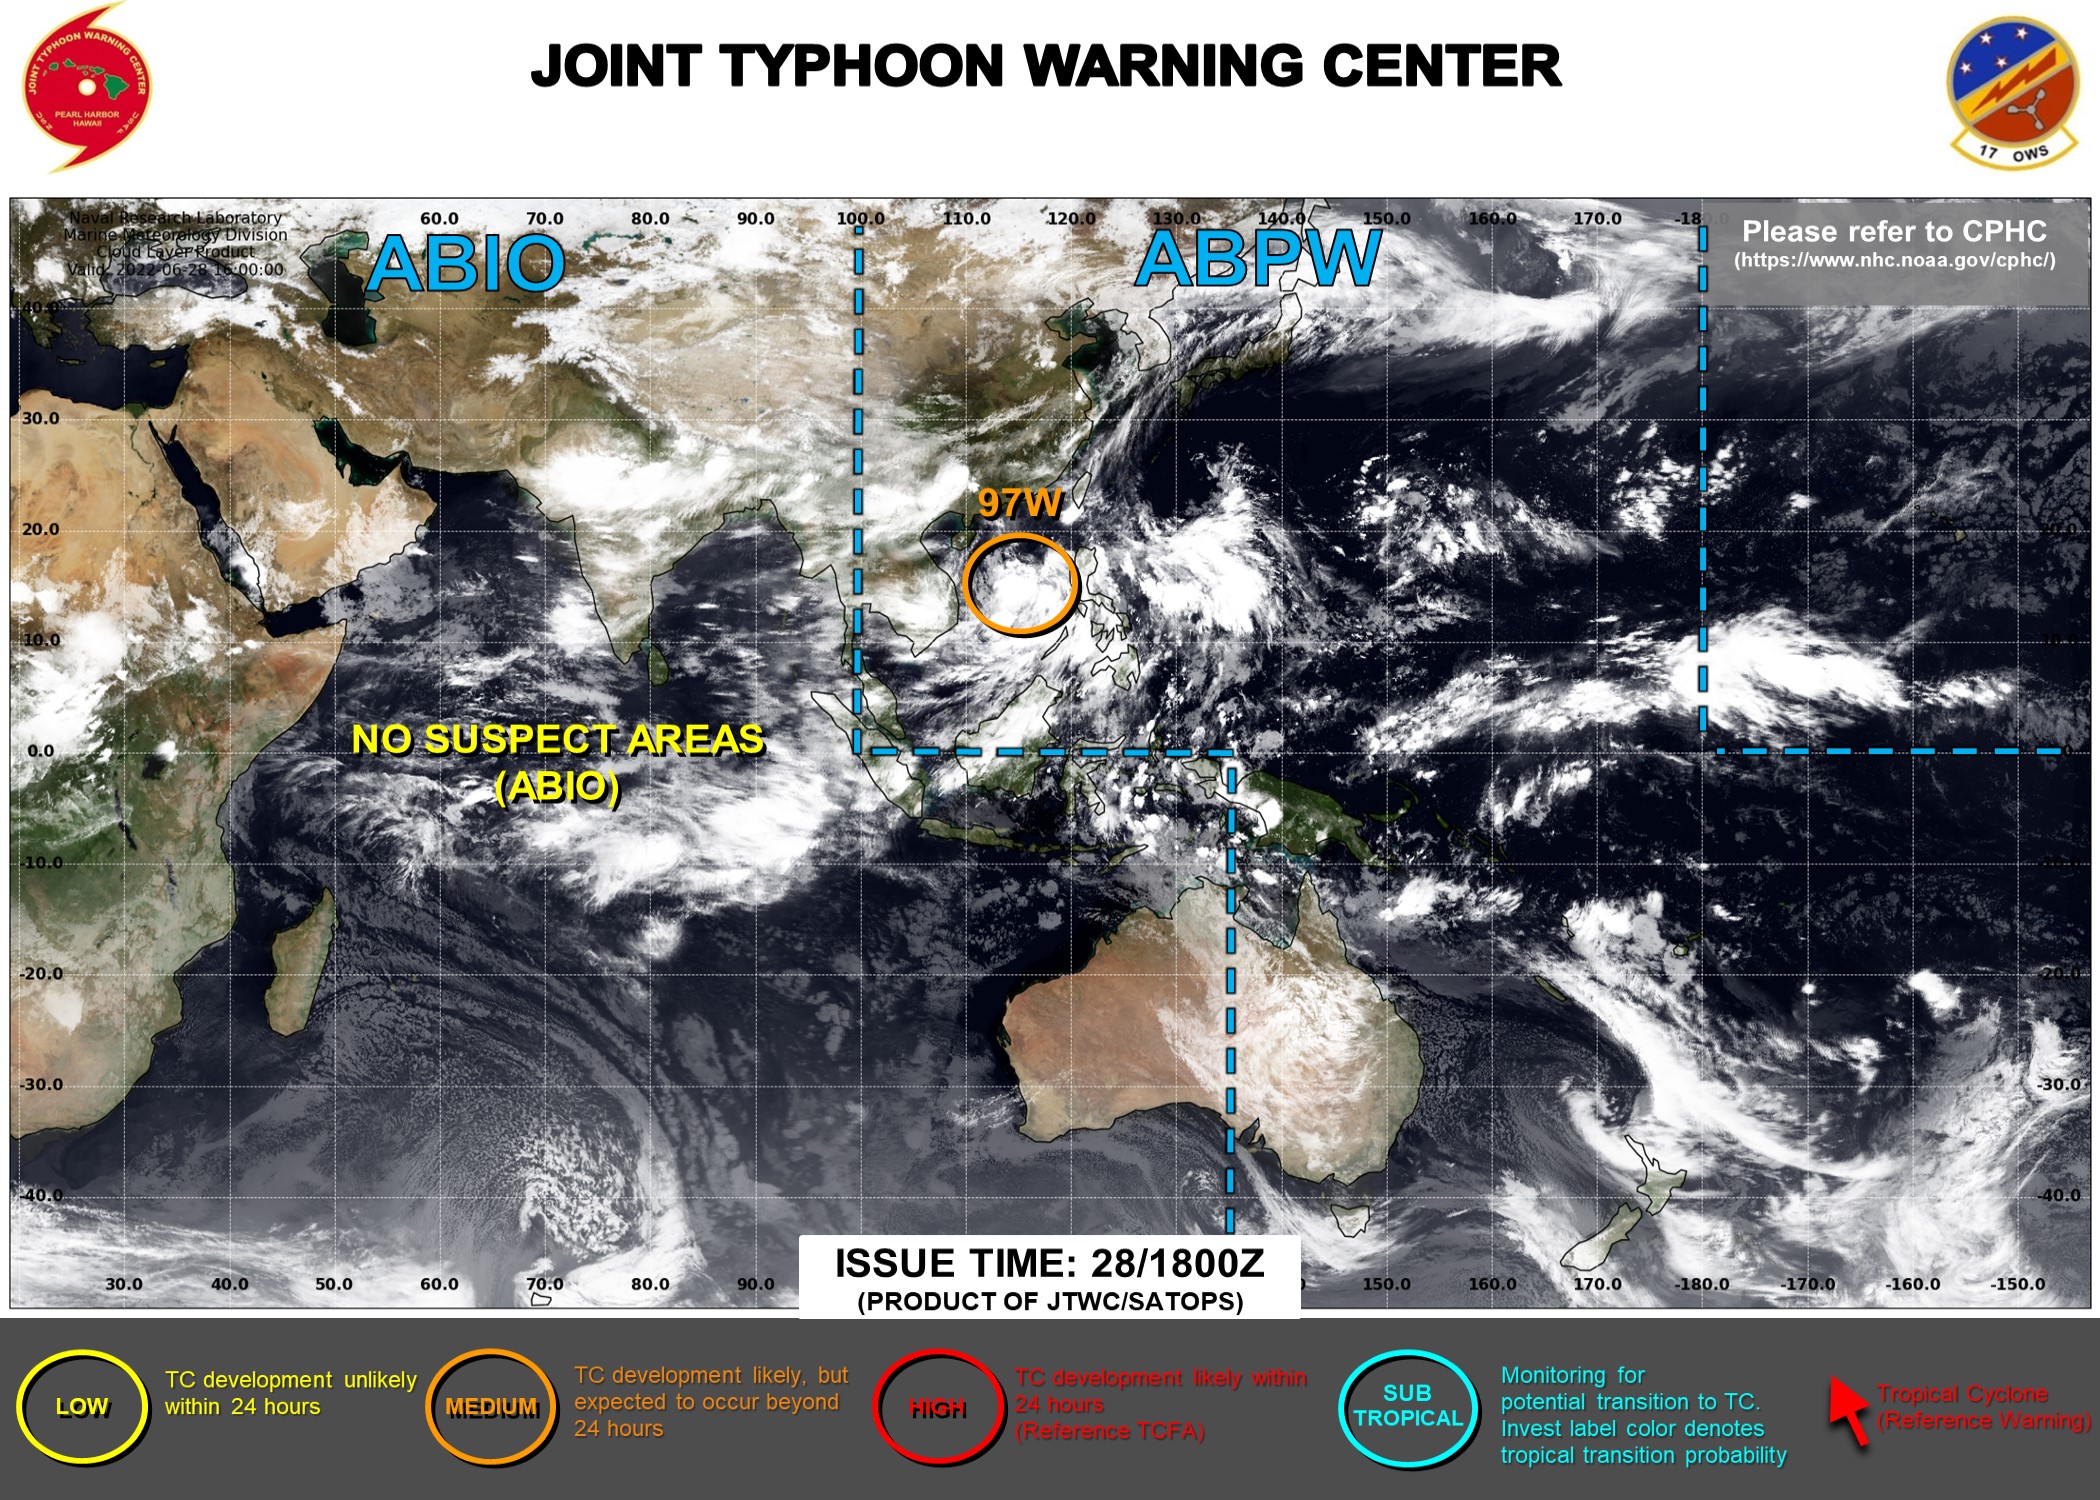 JTWC IS ISSUING 3HOURLY SATELLITE BULLETINS ON INVEST 97W AND INVEST 94A.